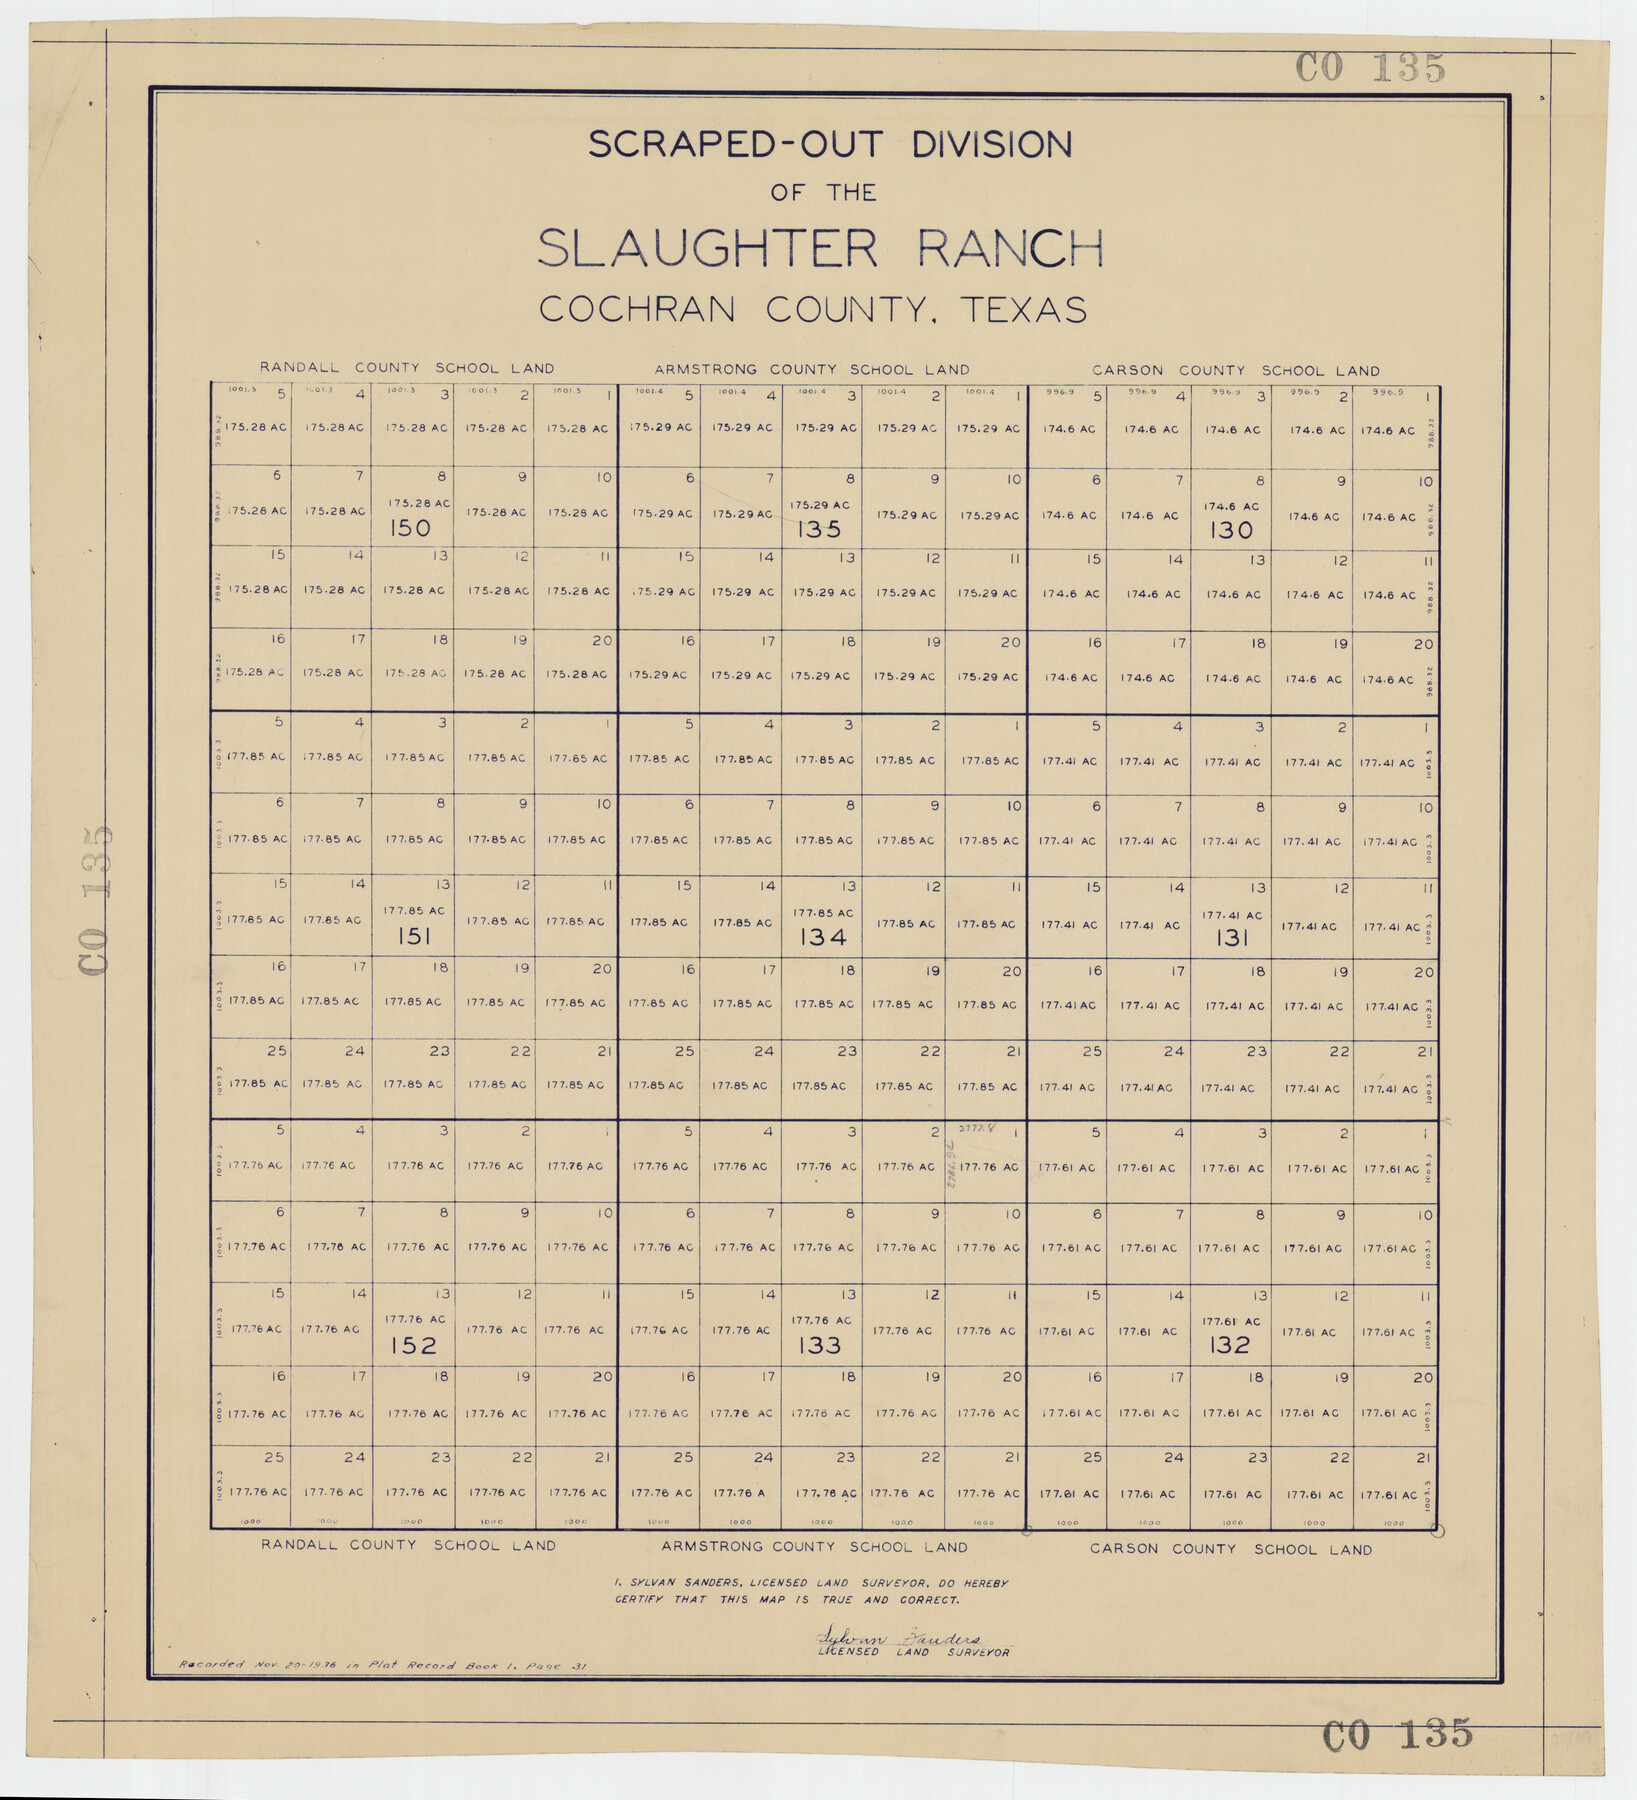 92485, Scraped-Out Division of the Slaughter Ranch Cochran County, Texas, Twichell Survey Records